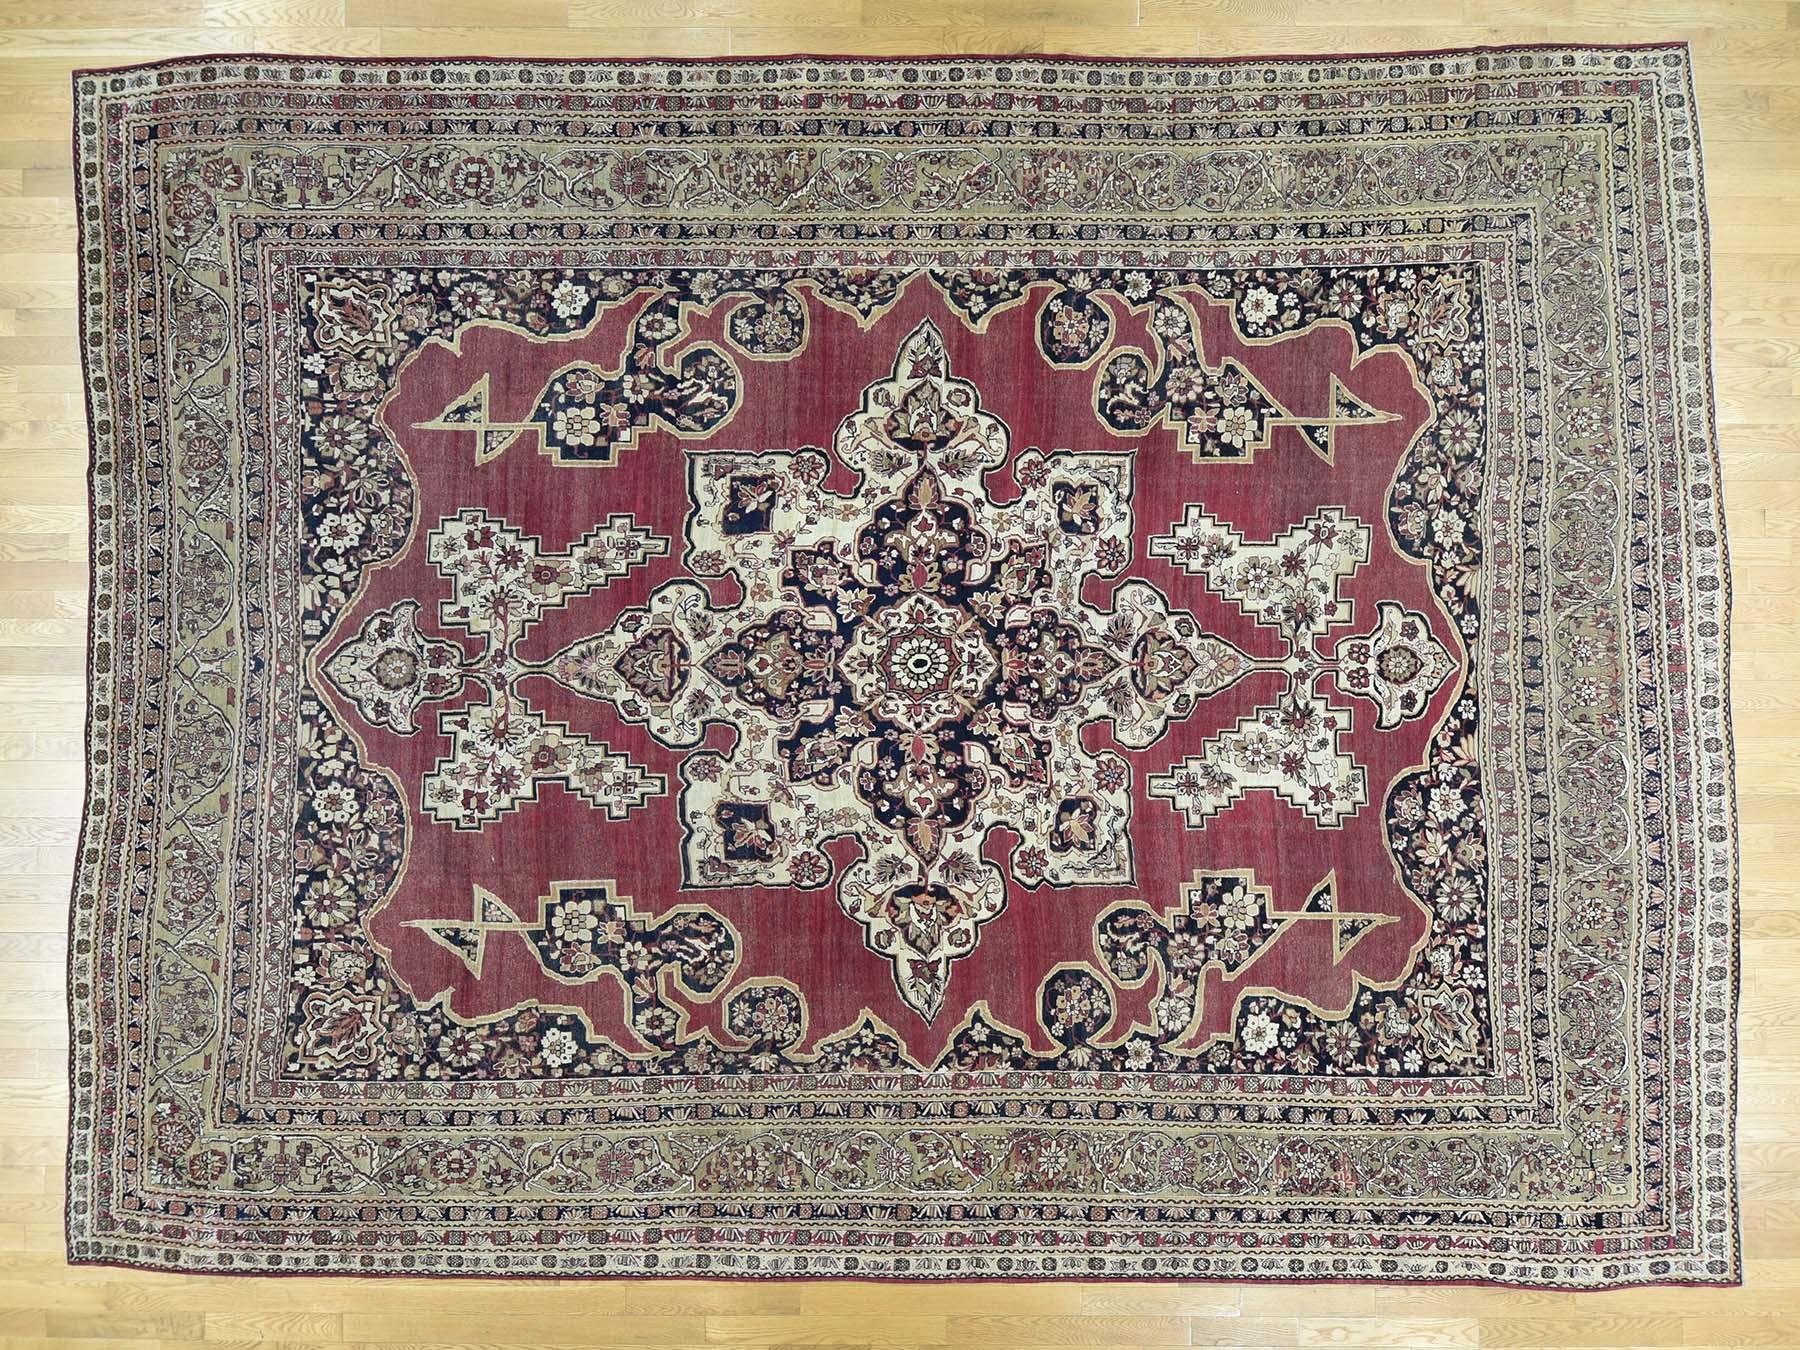 This is a Genuine hand knotted Oriental rug. It is not hand tufted or machine made rug. Our entire inventory is made of either hand knotted or handwoven Rugs.

Remodel your home with this stunning antique carpet. This handcrafted Persian Lavar